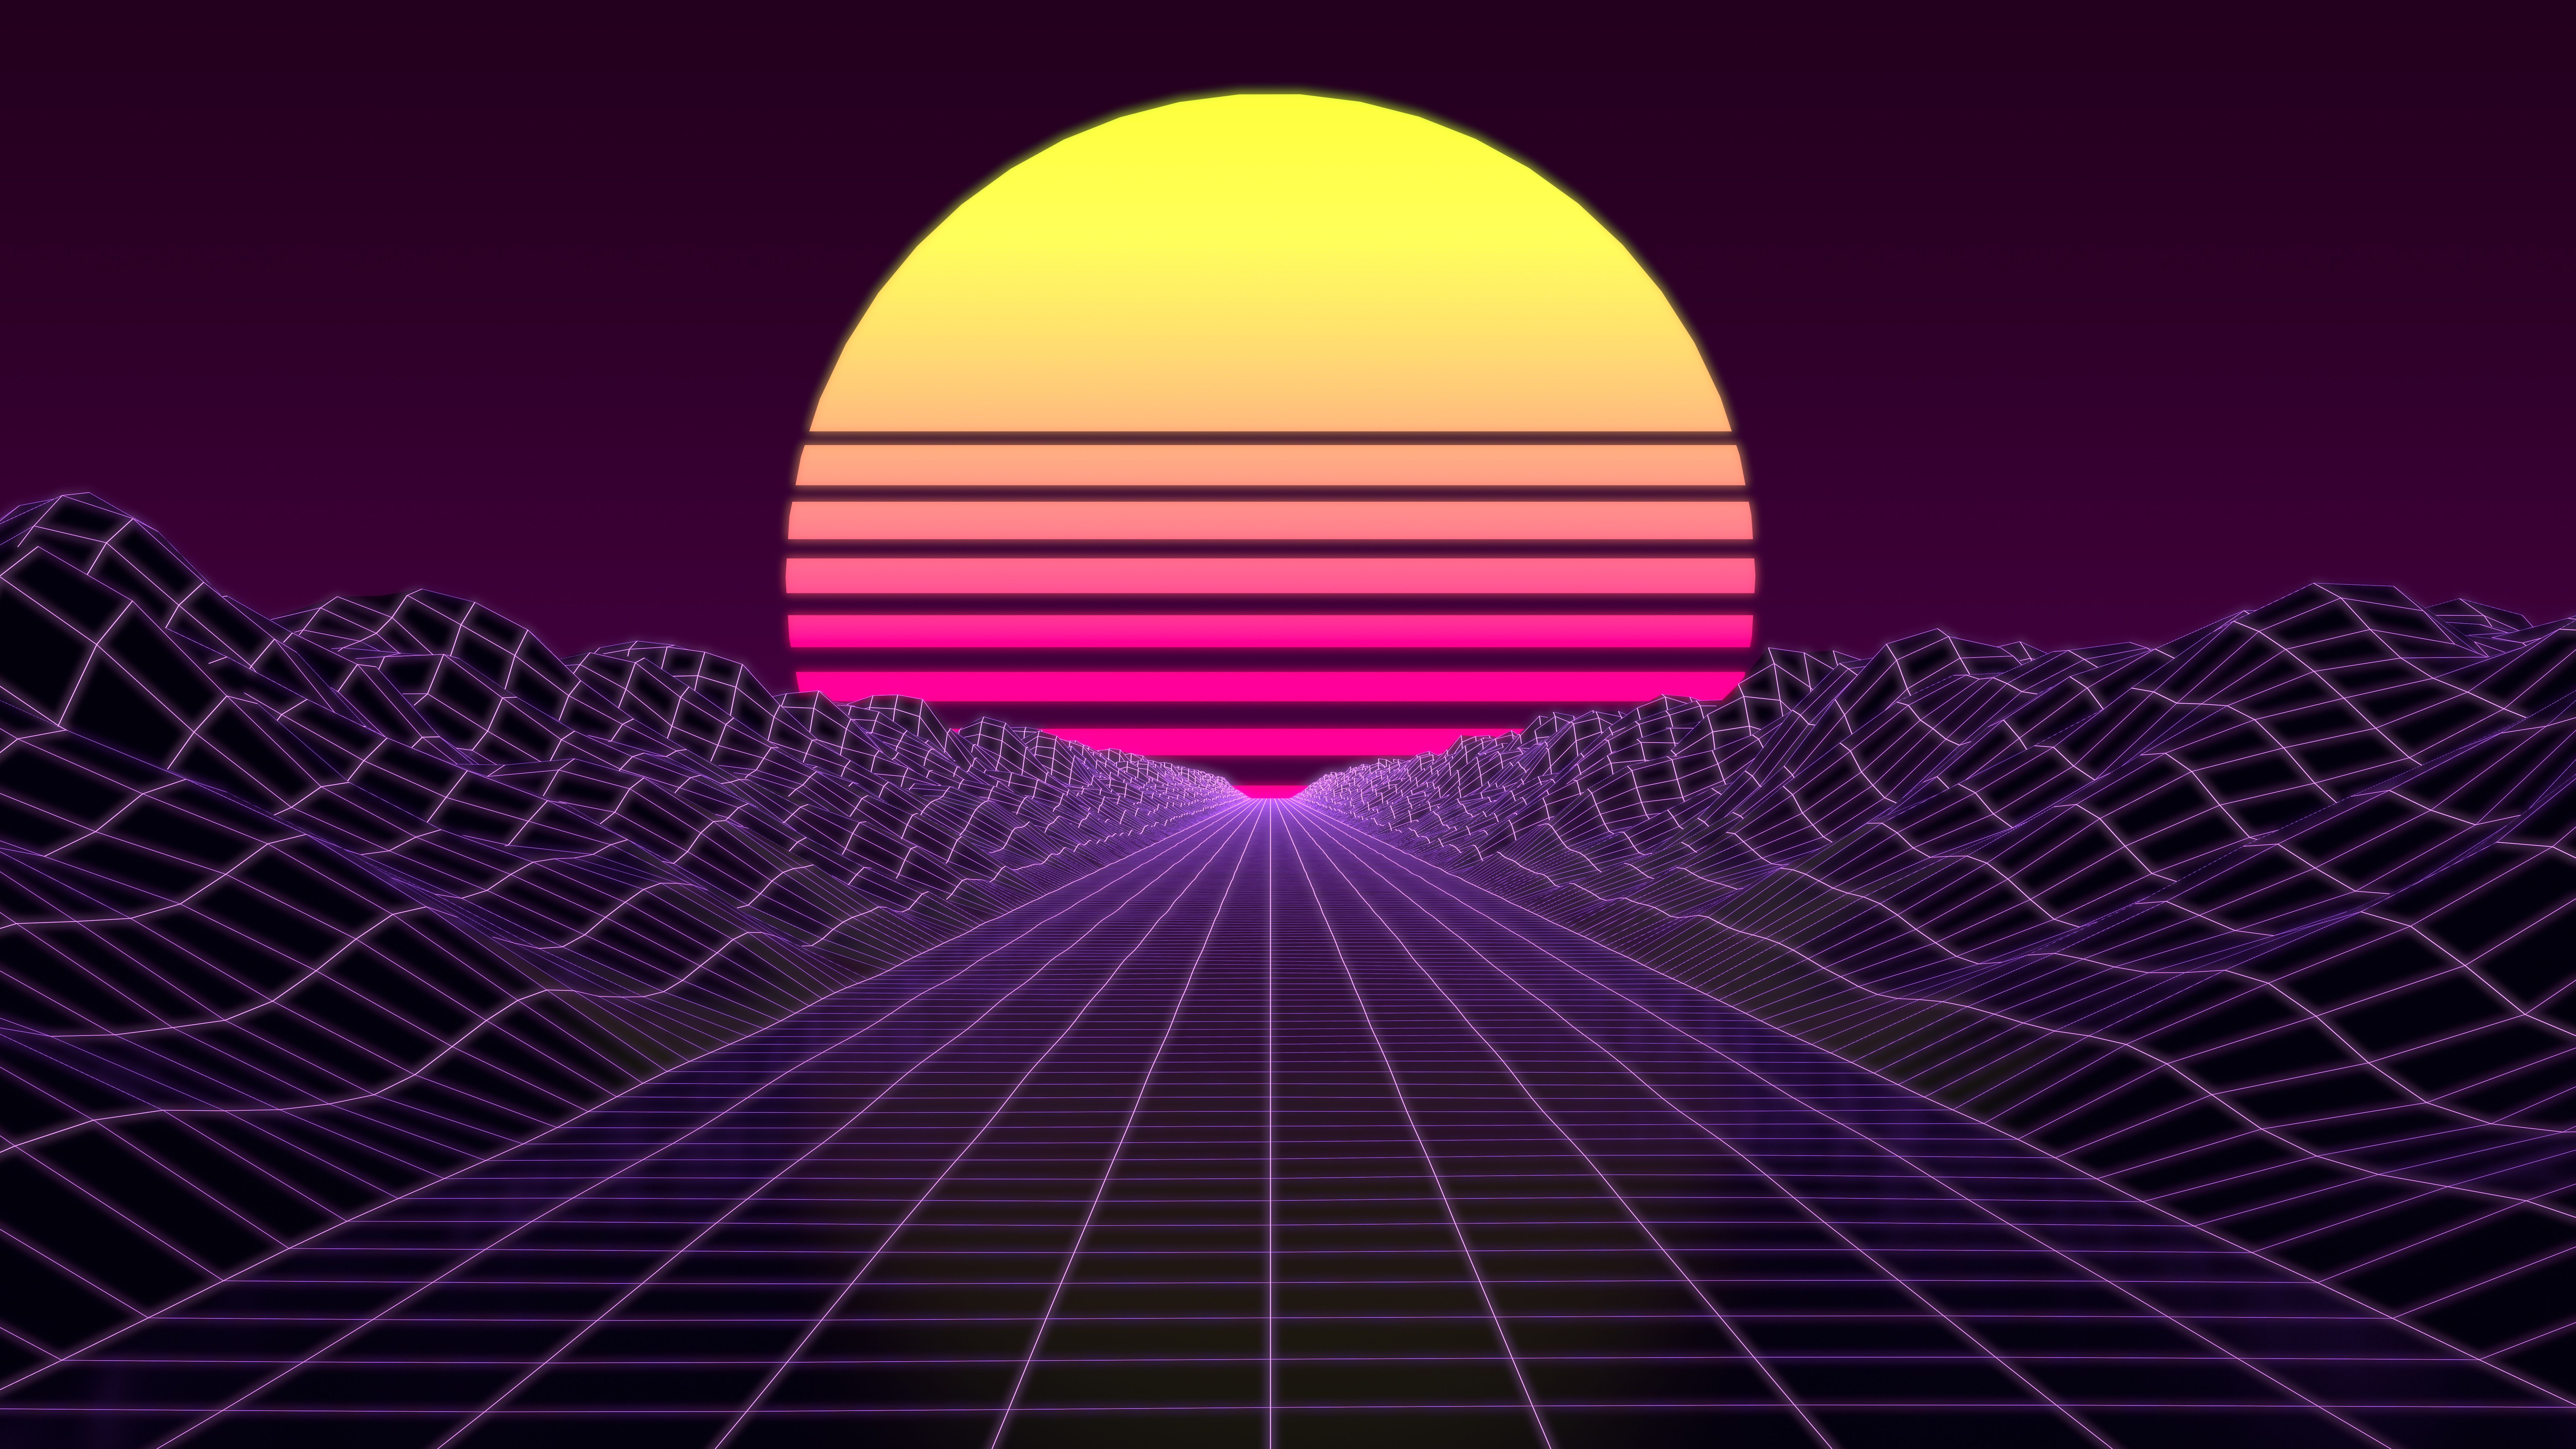 Free Download 118 Retro Wave Hd Wallpapers Background 6463